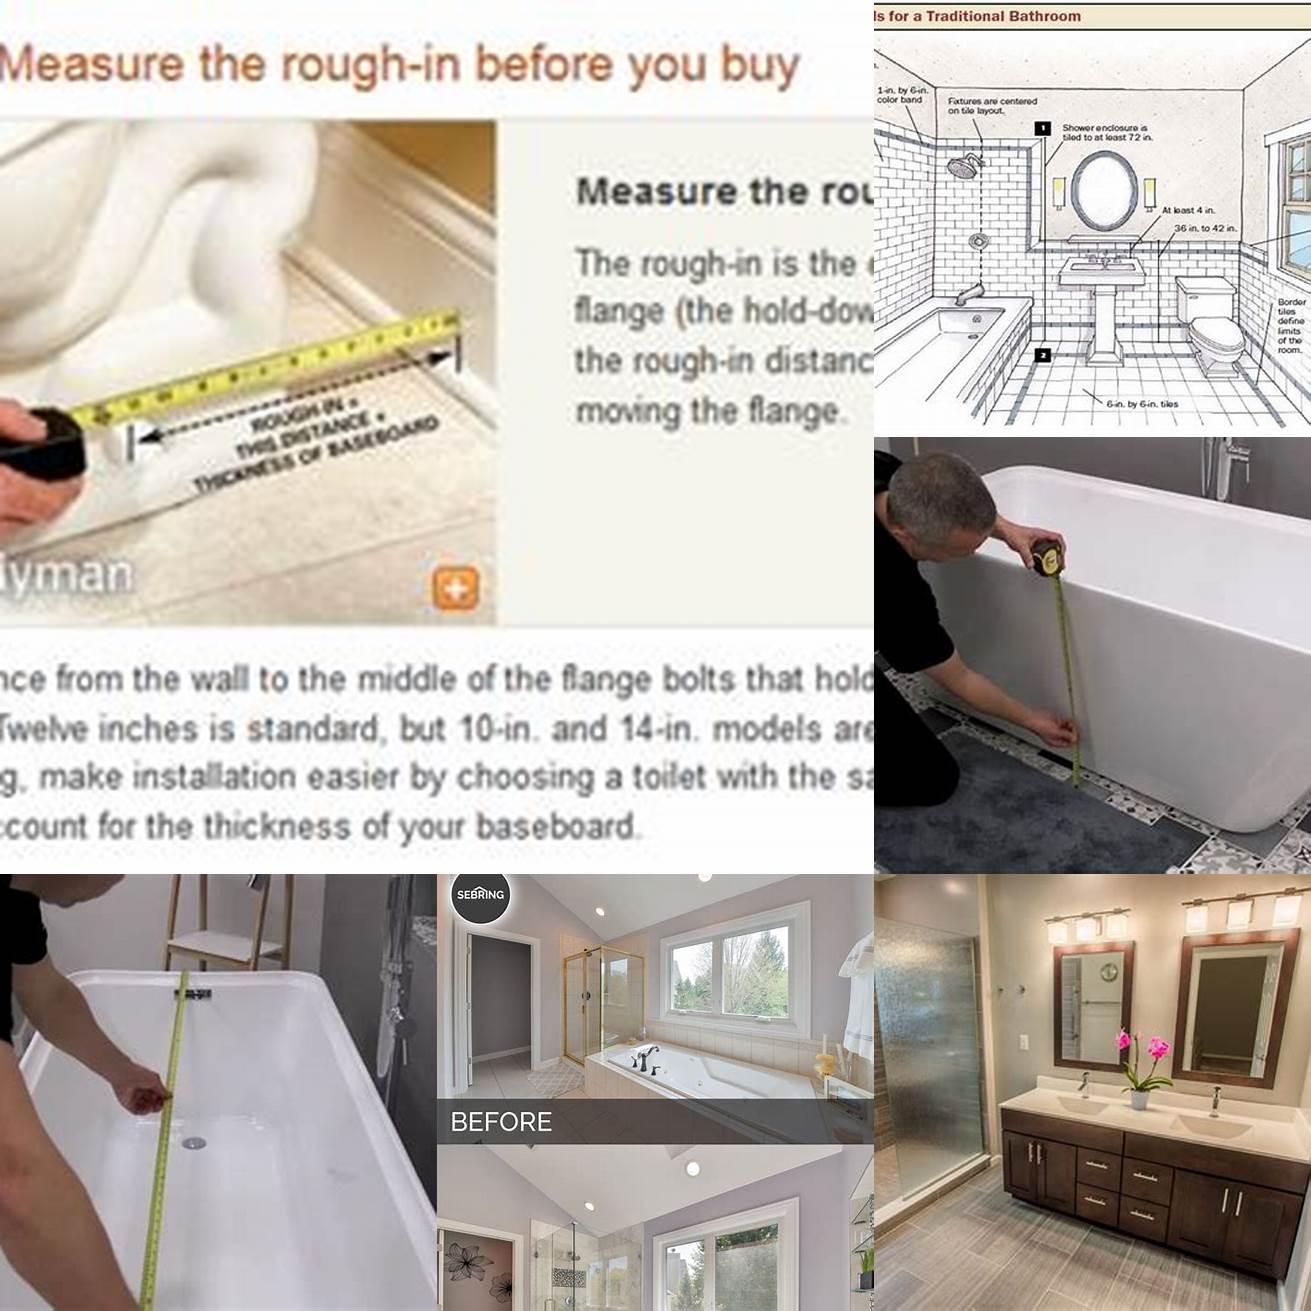 Measure your bathroom before purchasing